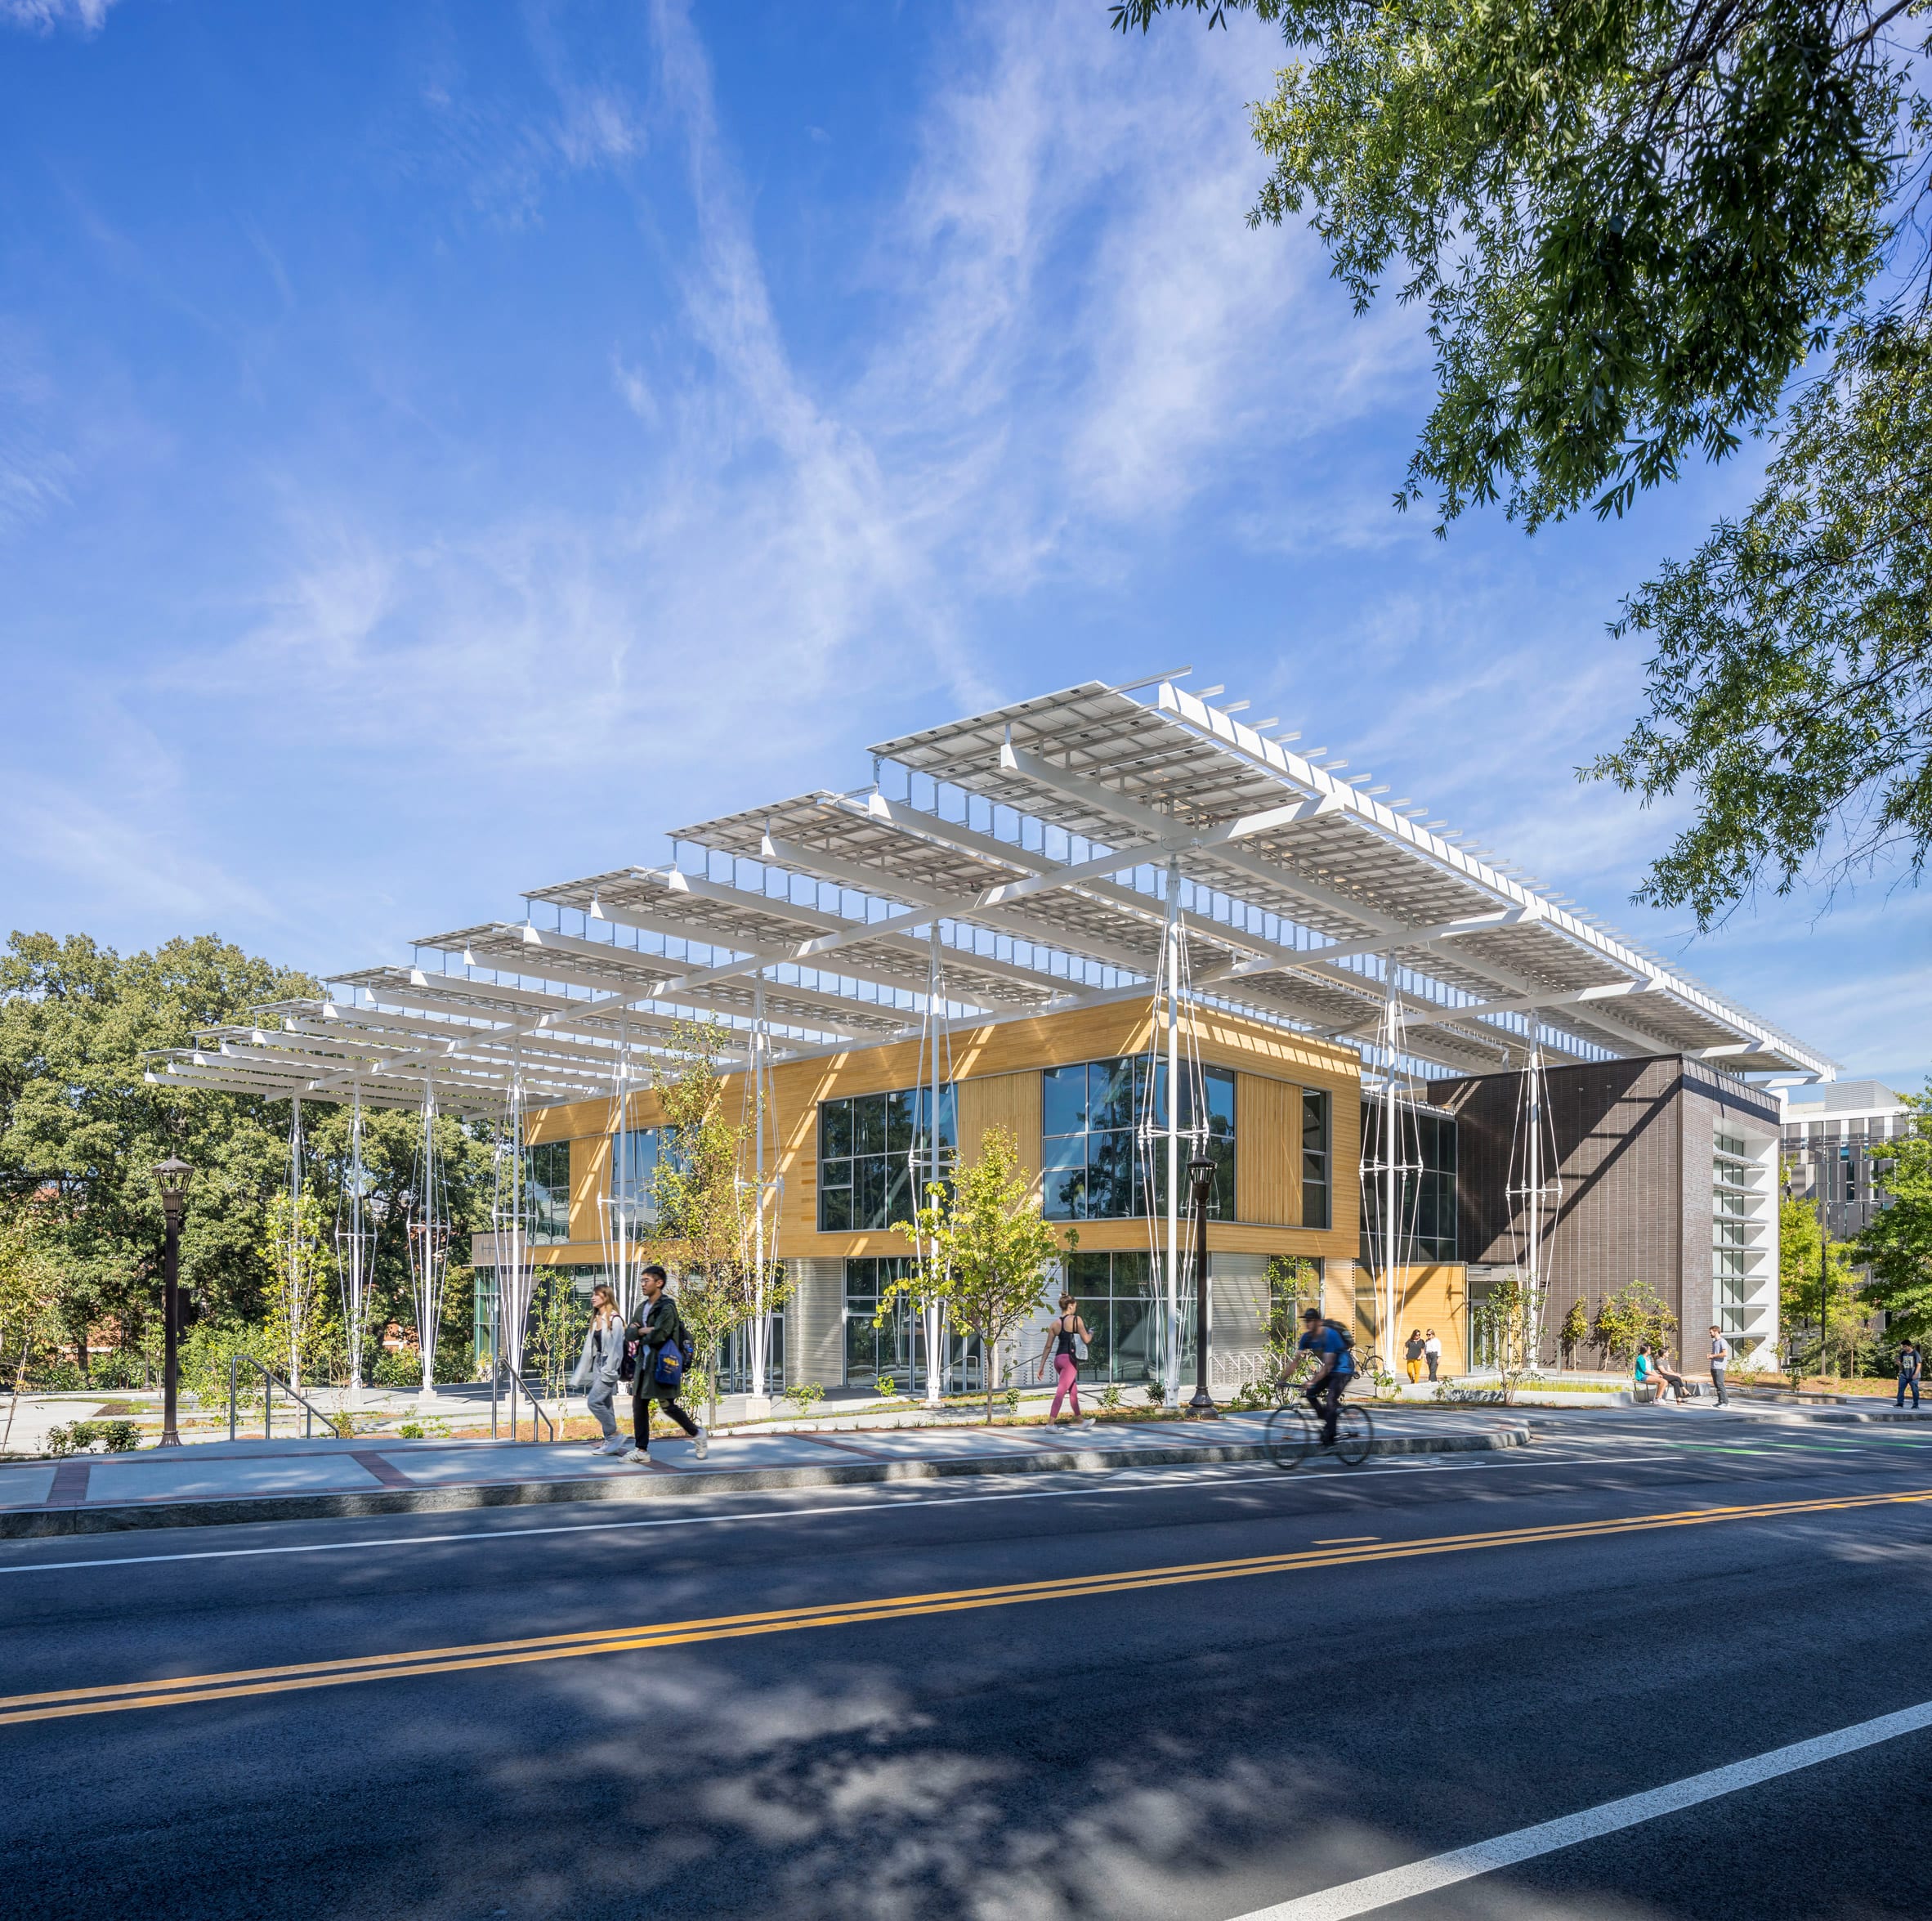 Architectural shading systems find new markets - Fabric Architecture  Magazine